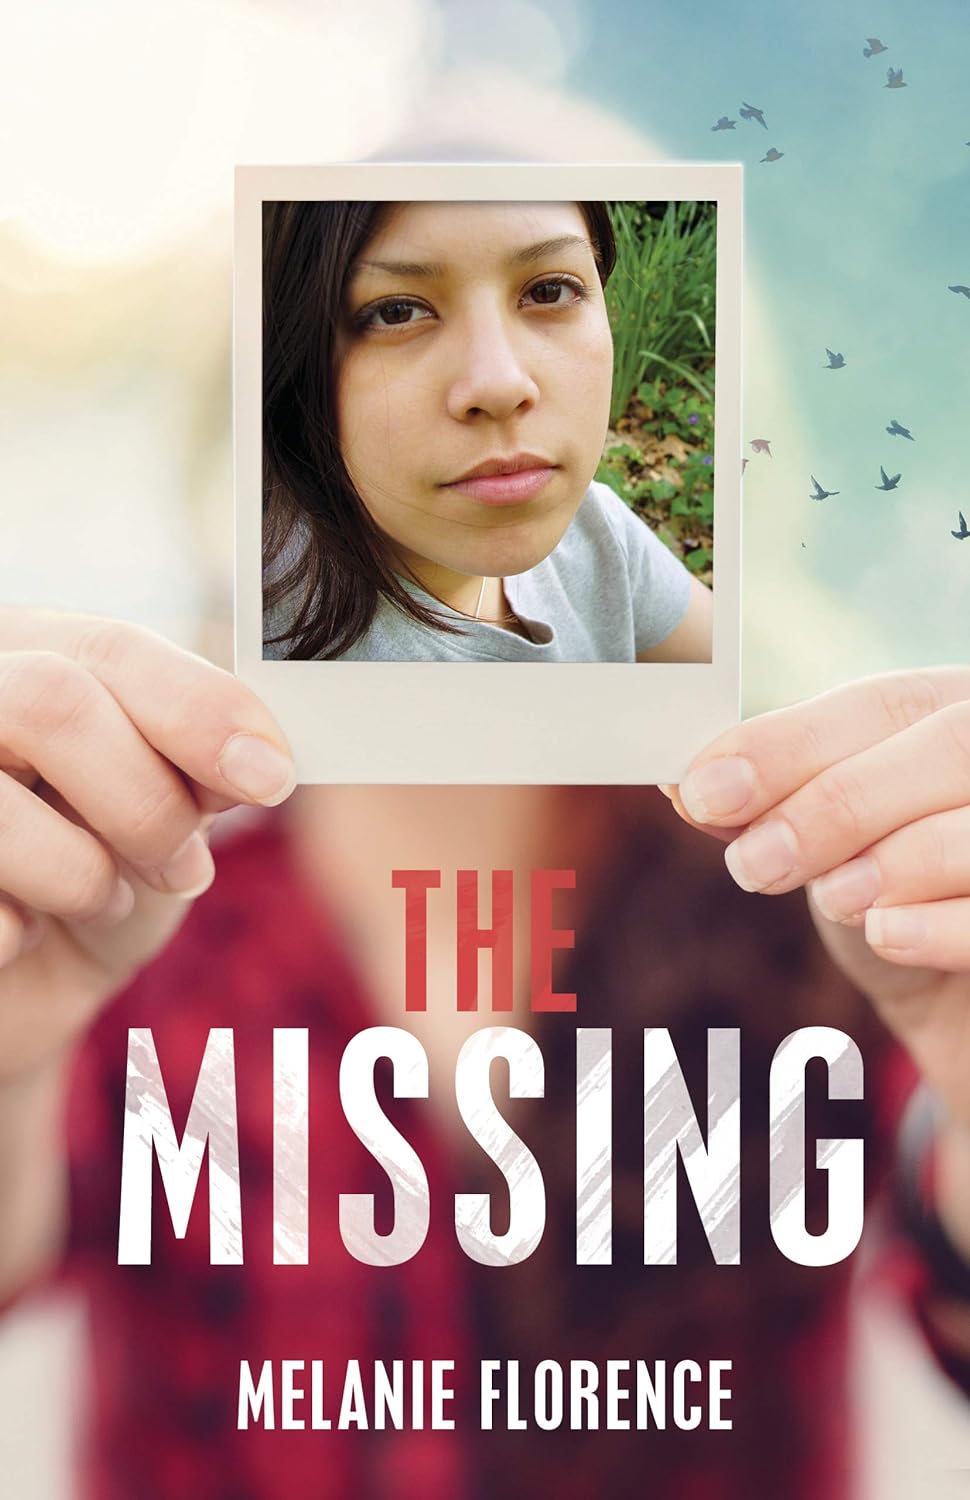 The Missing [Melanie Florence]